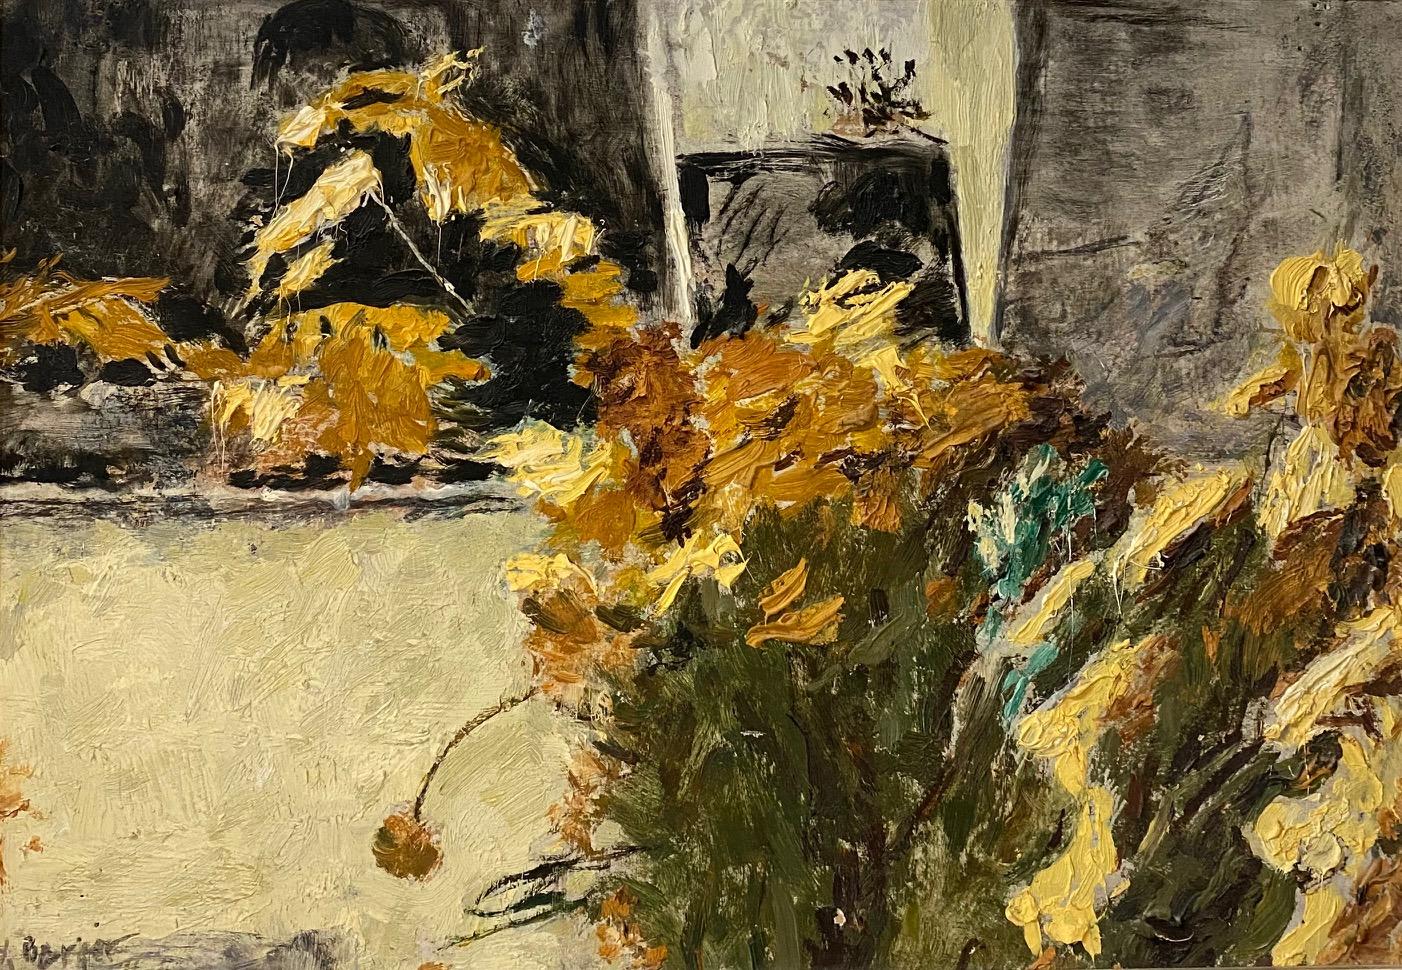 Oil on cardboard sold with frame 
Total size with Frame 34x46 cm
Hans BERGER is an artist born in Switzerland in 1882 and died in 1977. His works have been sold at public auction 513 times, mainly in the Painting category.